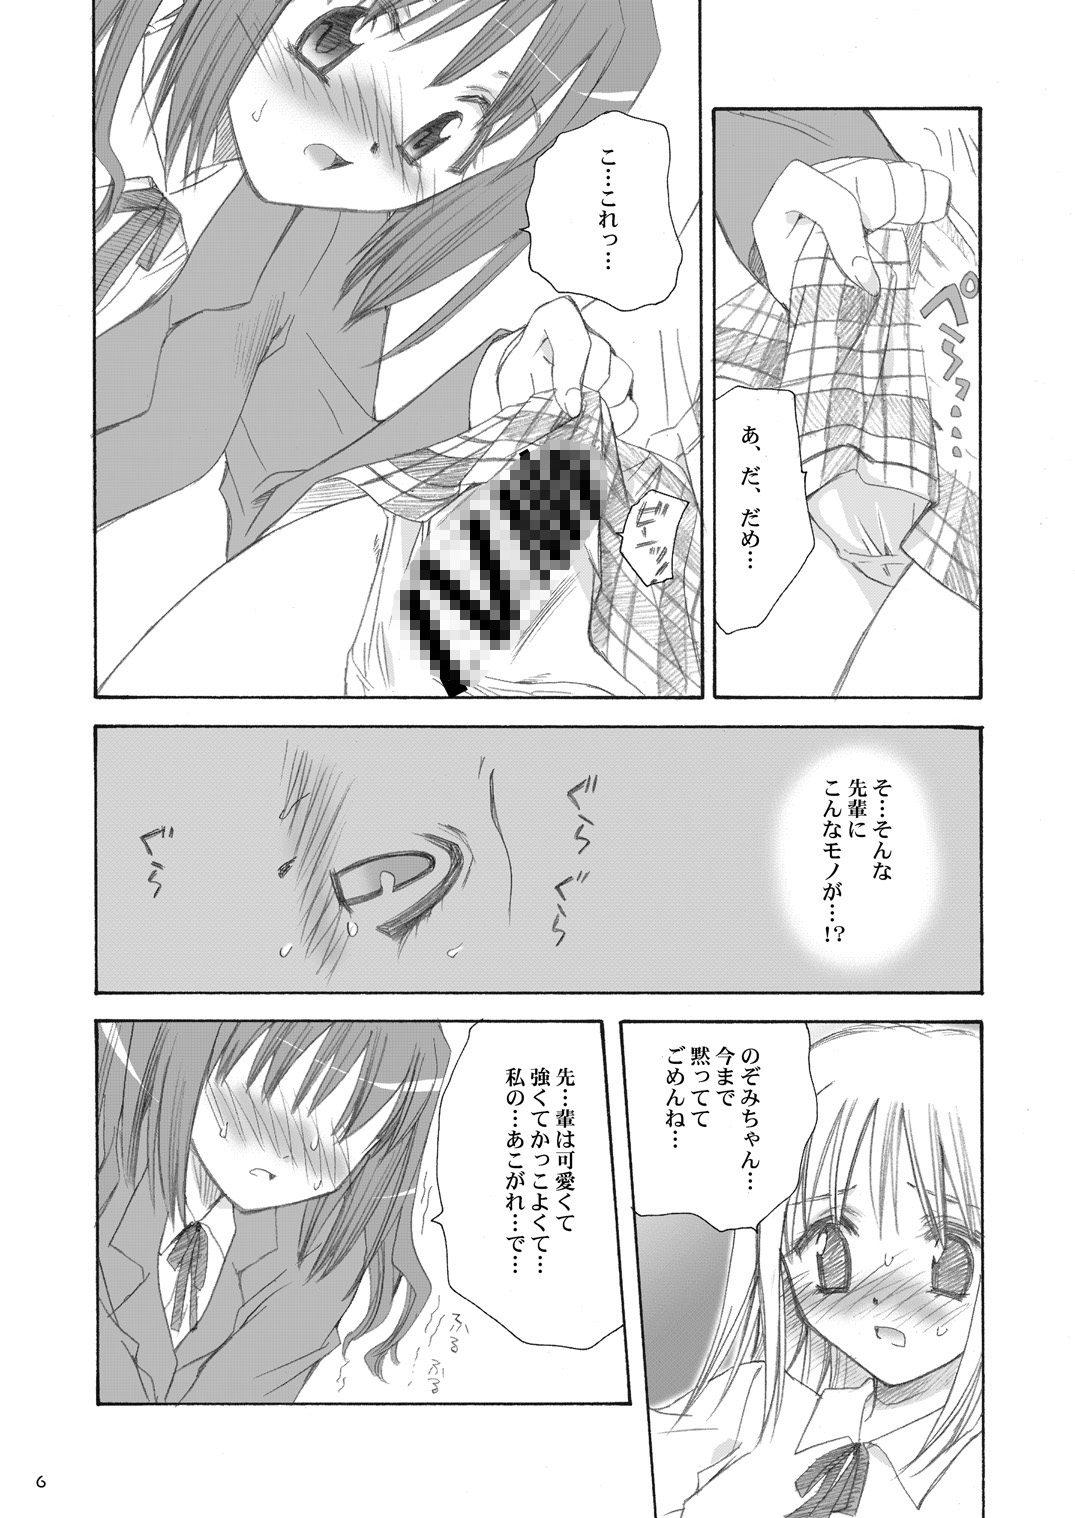 Juicy つかまえた。 Curious - Page 5